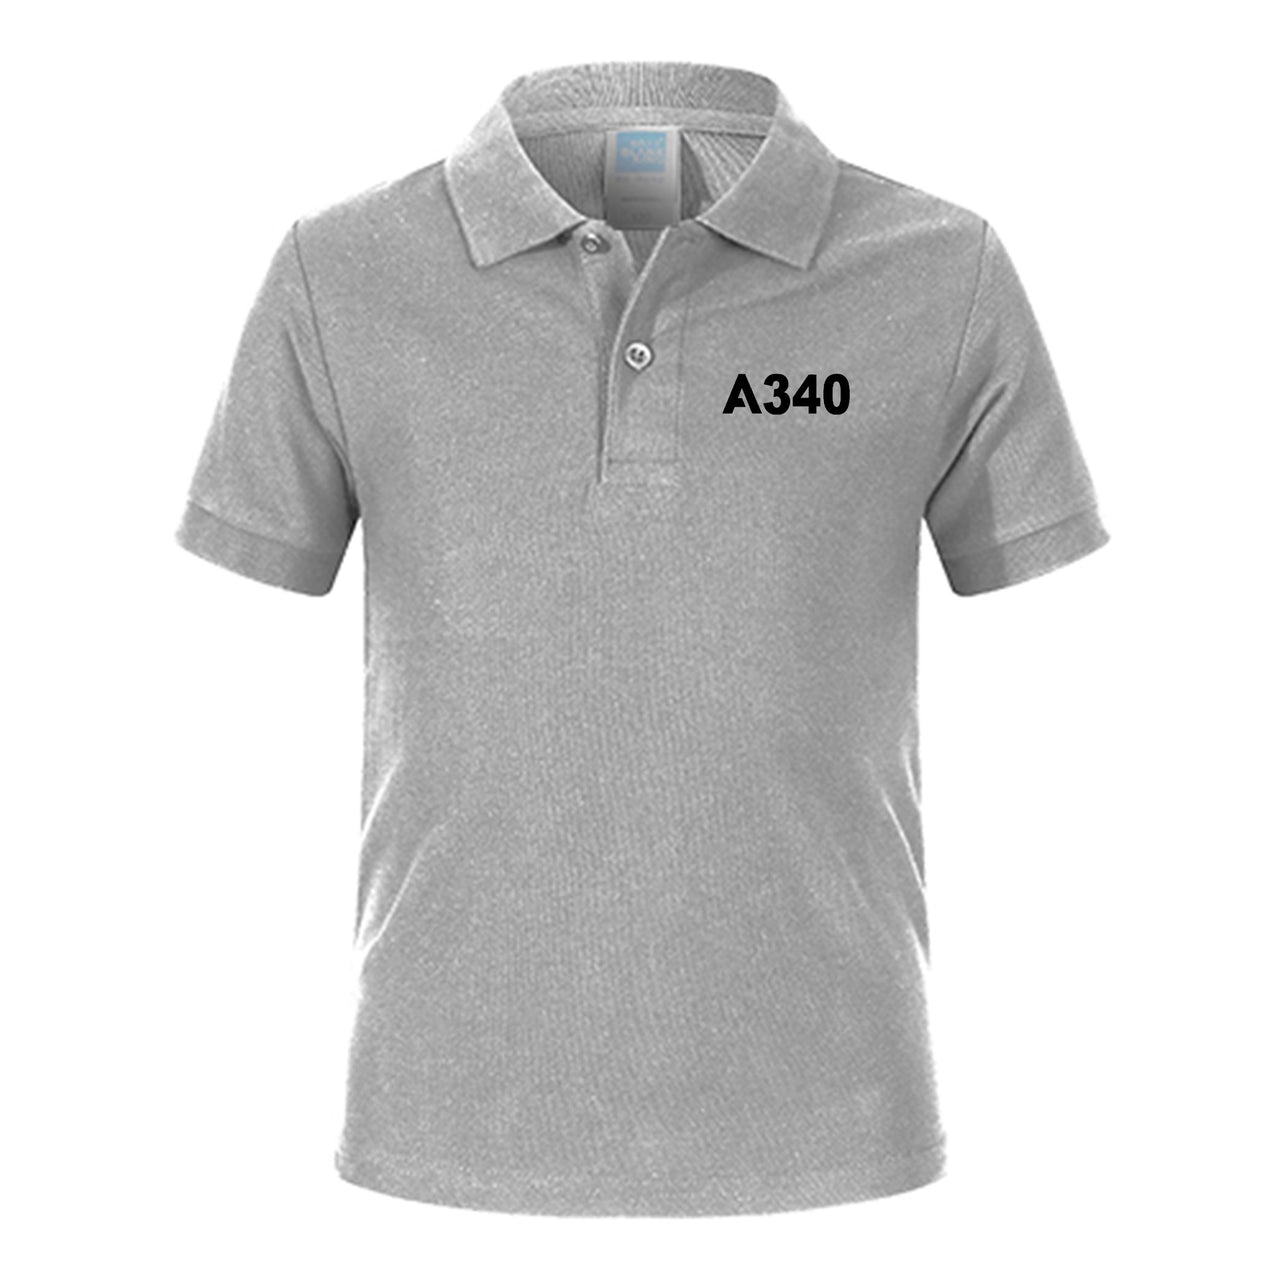 A340 Flat Text Designed Children Polo T-Shirts